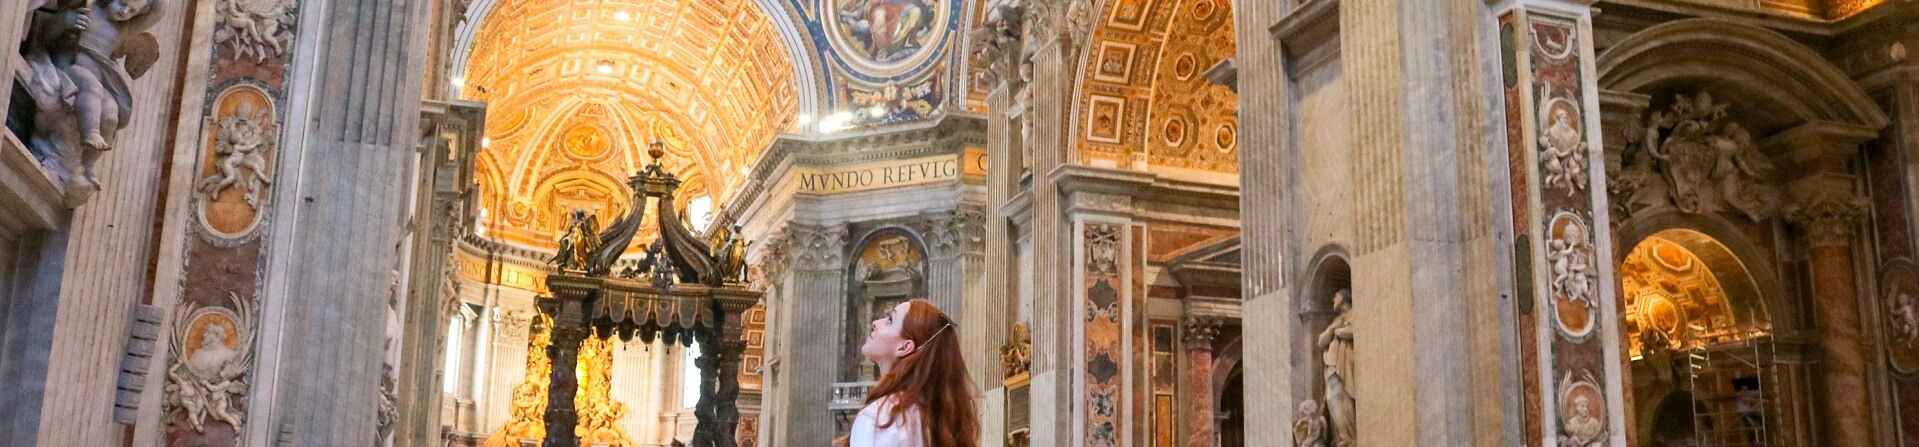 Is it worth doing a guided tour of the Vatican?